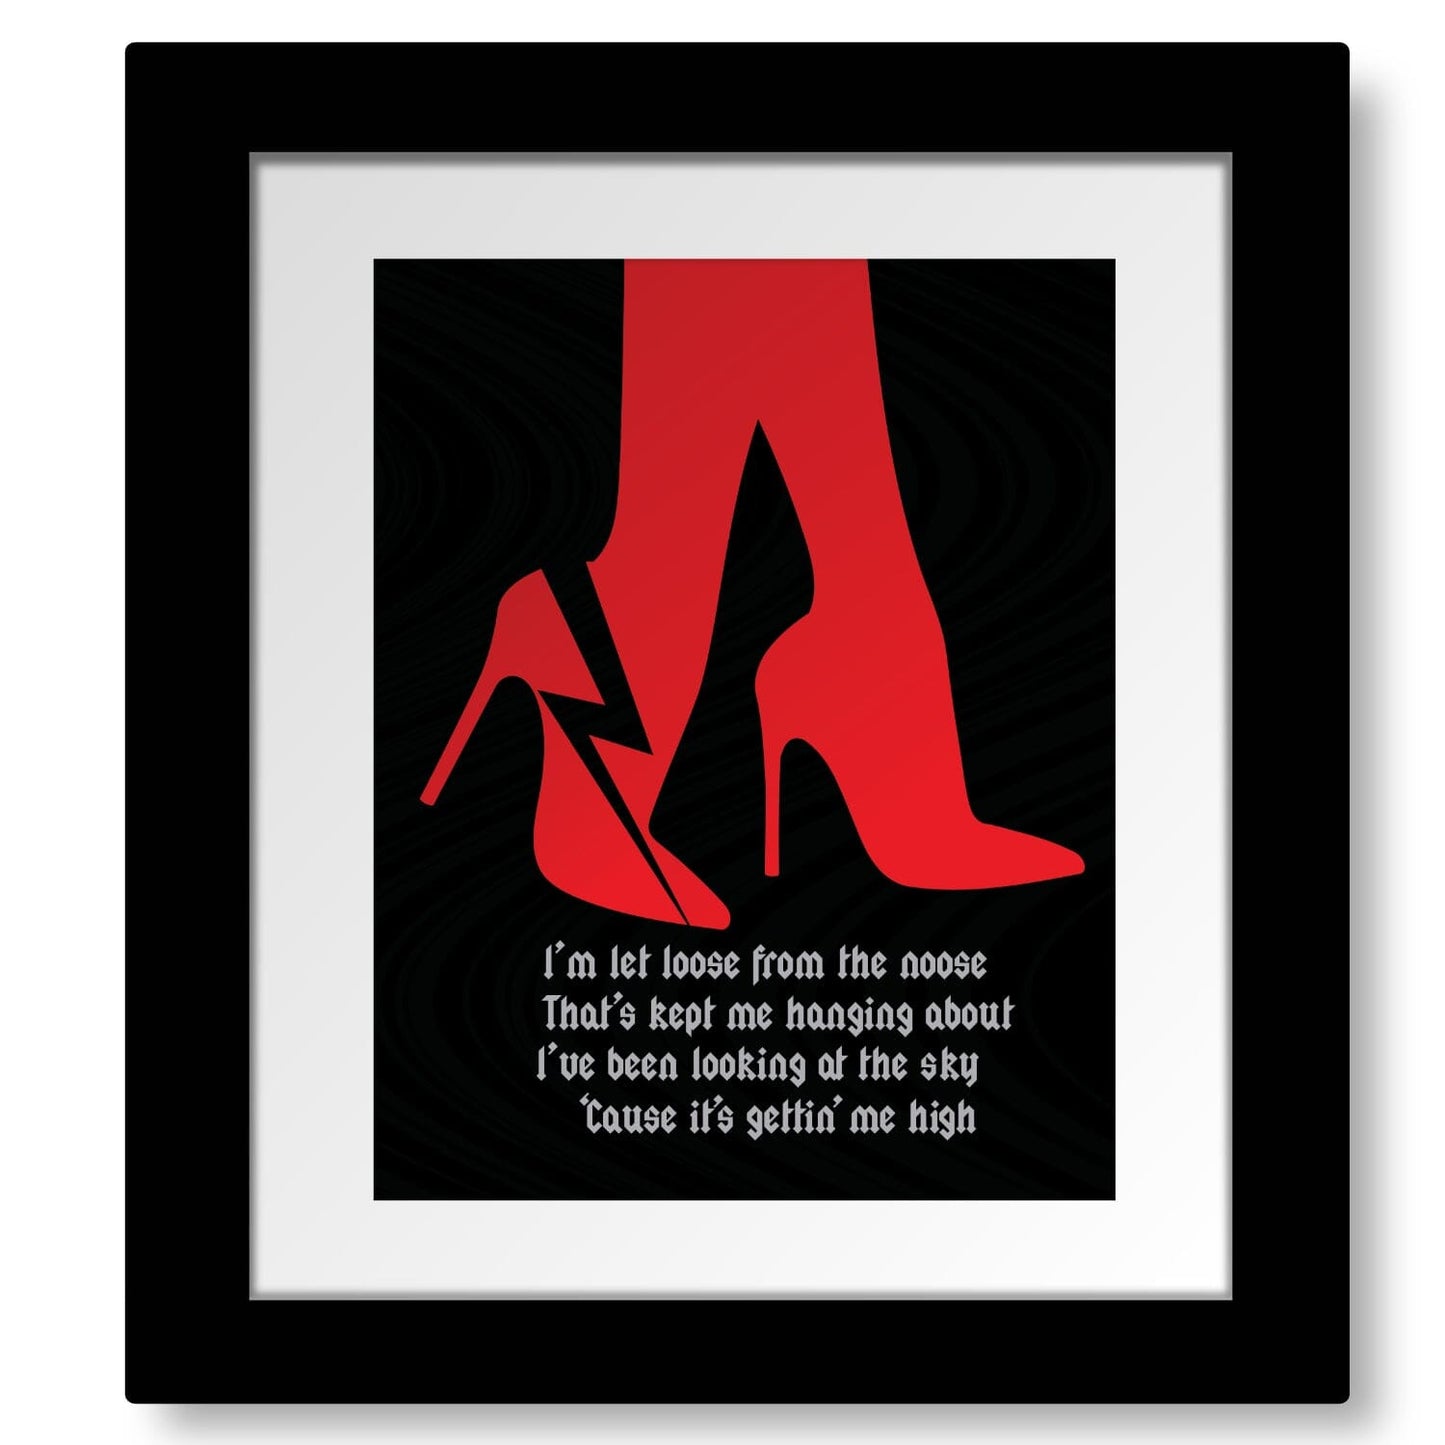 Back in Black by ACDC - Lyric Inspired Art Wall Poster Print Song Lyrics Art Song Lyrics Art 8x10 Matted and Framed Print 